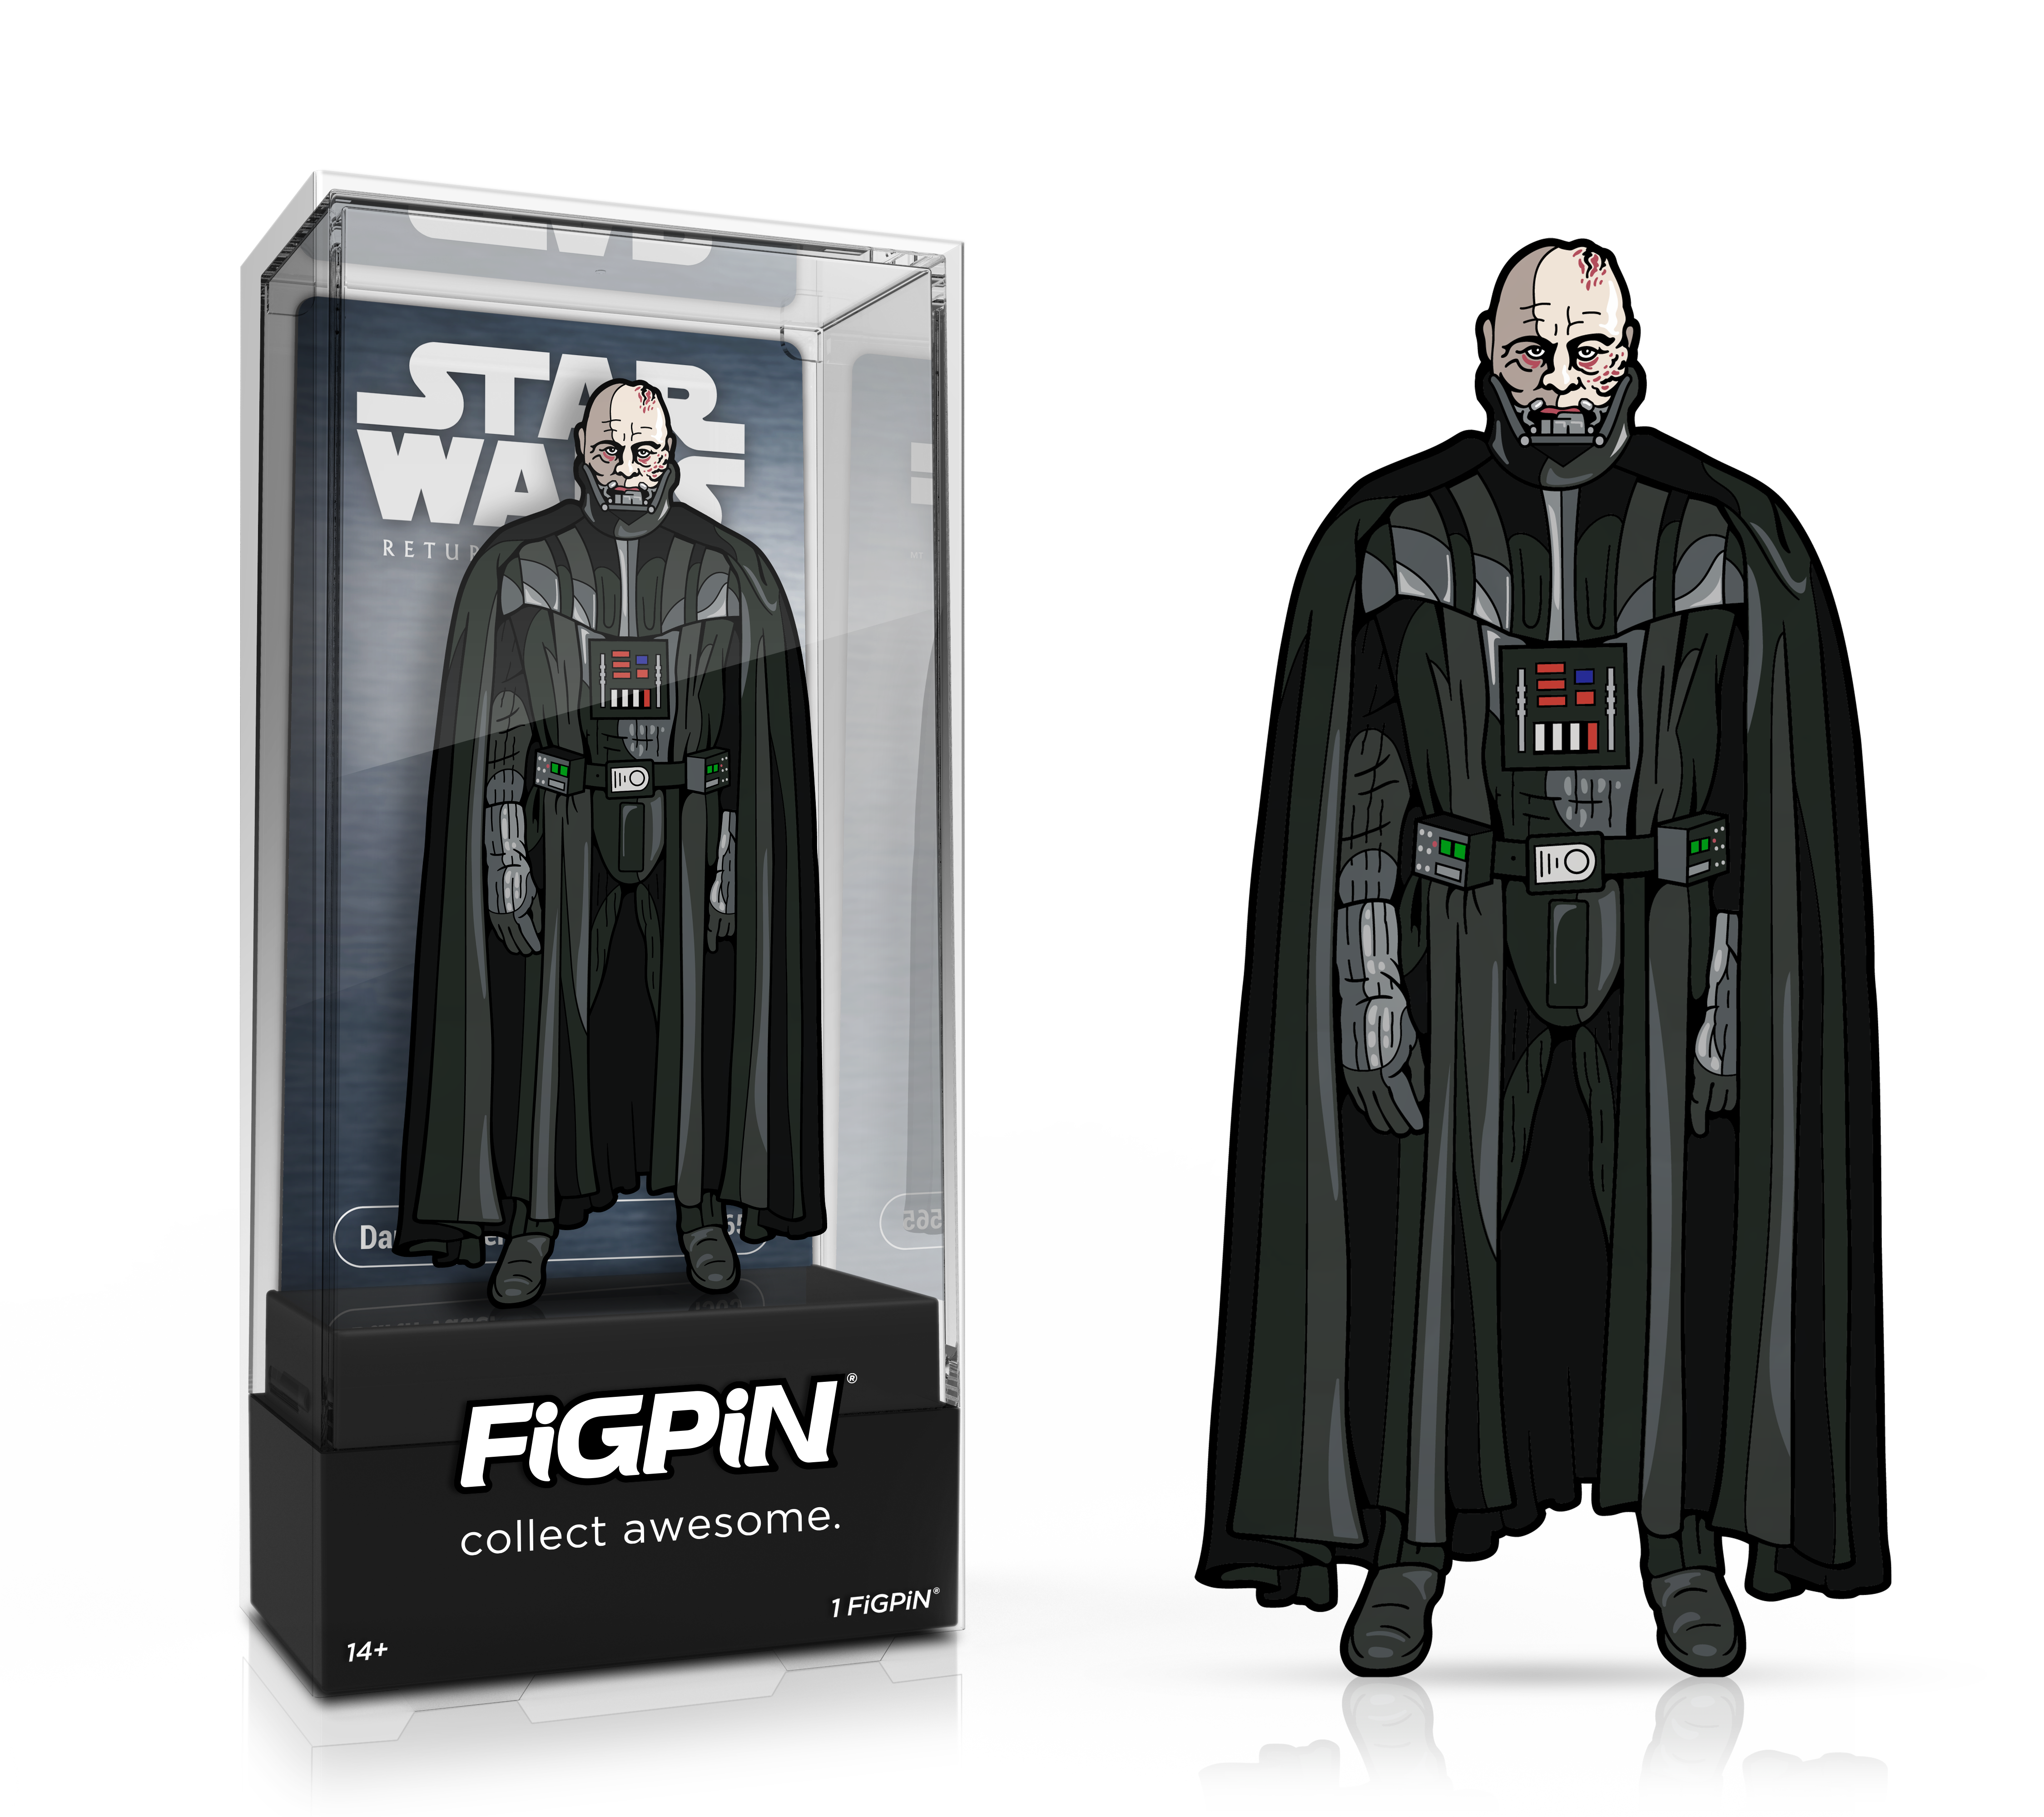 Side by side view of STAR WARS: RETURN OF THE JEDI's Darth Vader enamel pin in display case and the art render.